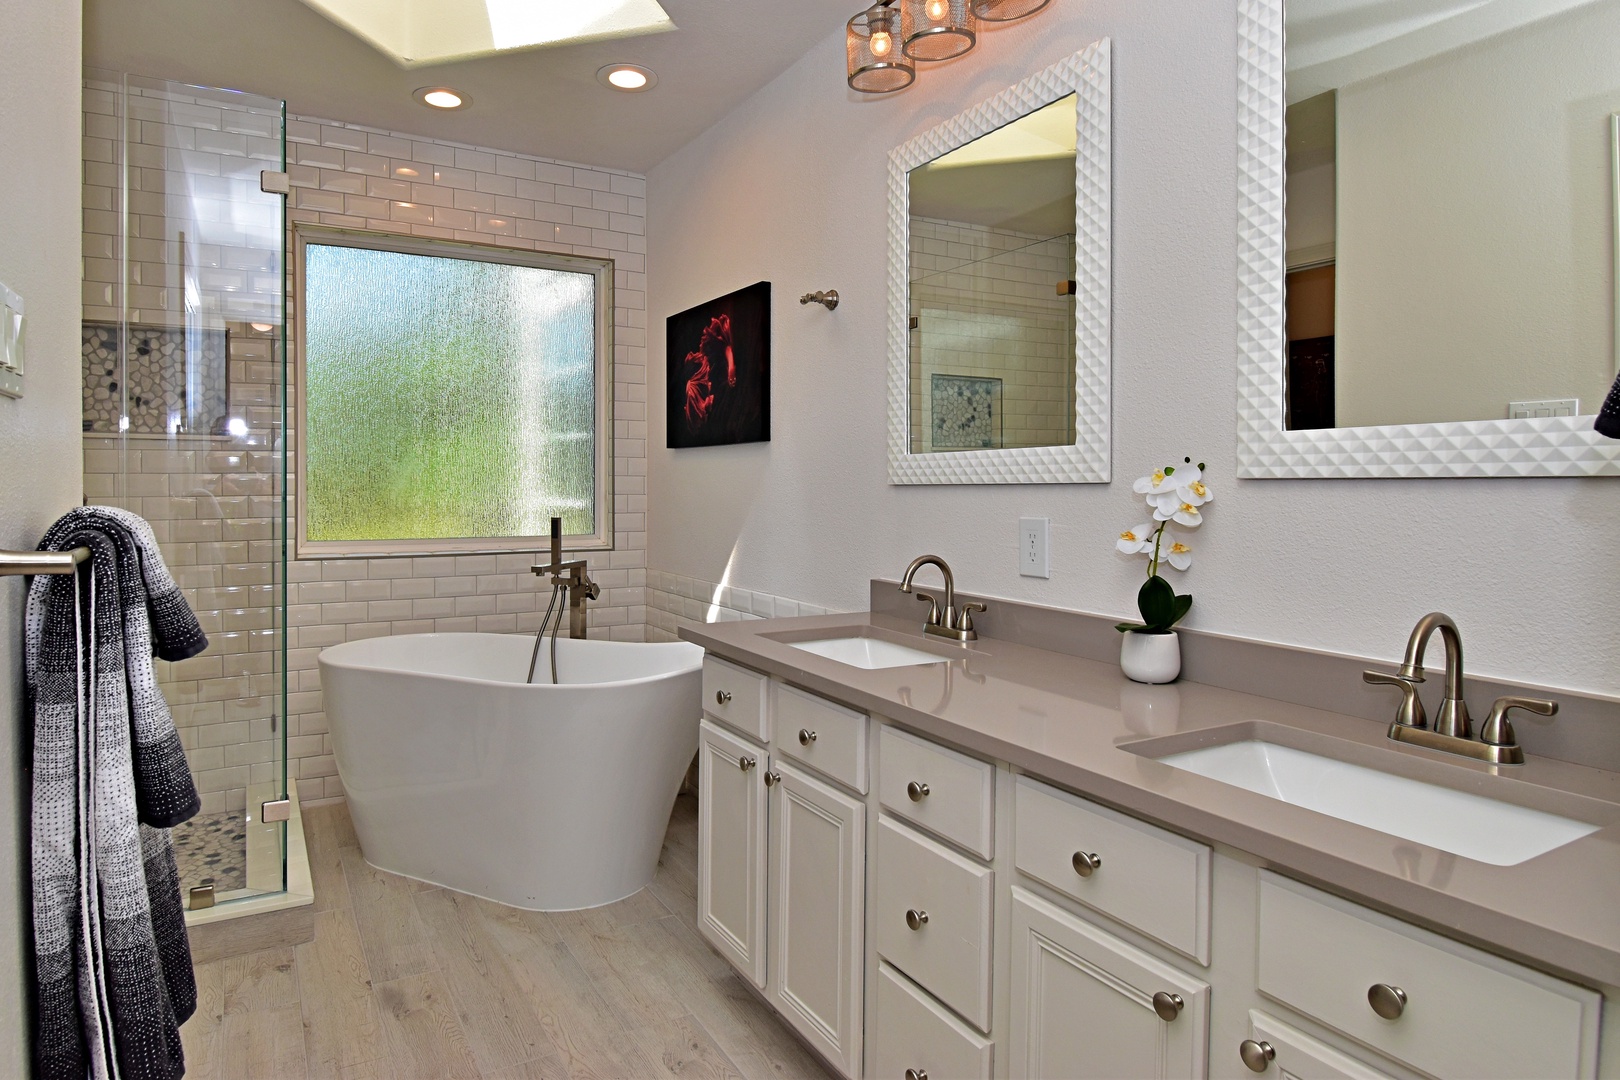 The king ensuite features a dual vanity, glass shower, & luxurious soaking tub